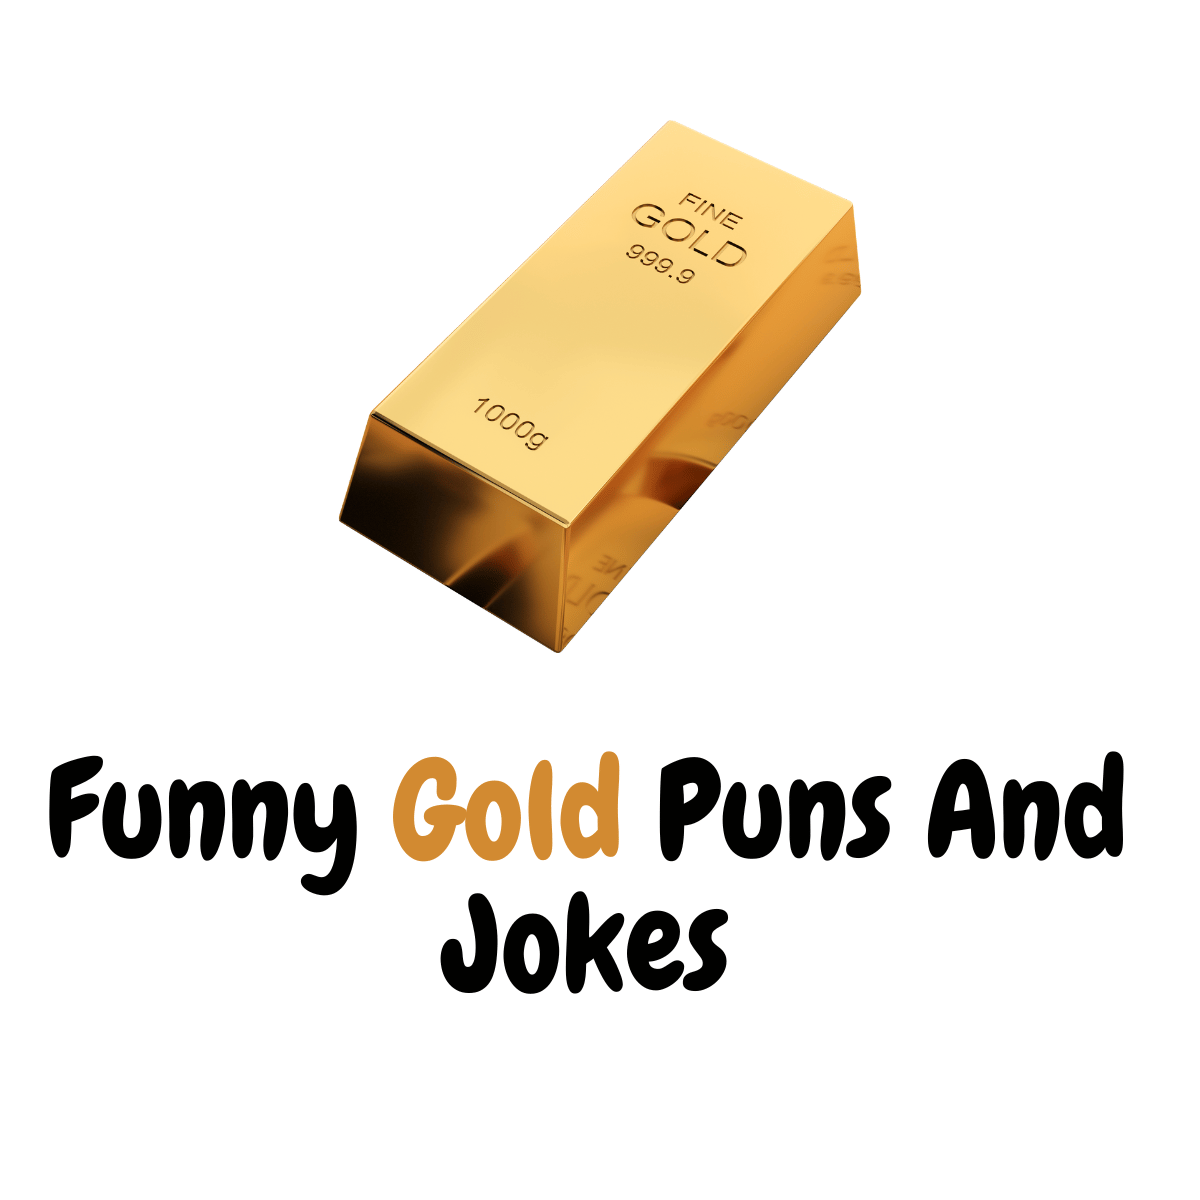 Funny Gold Puns And Jokes